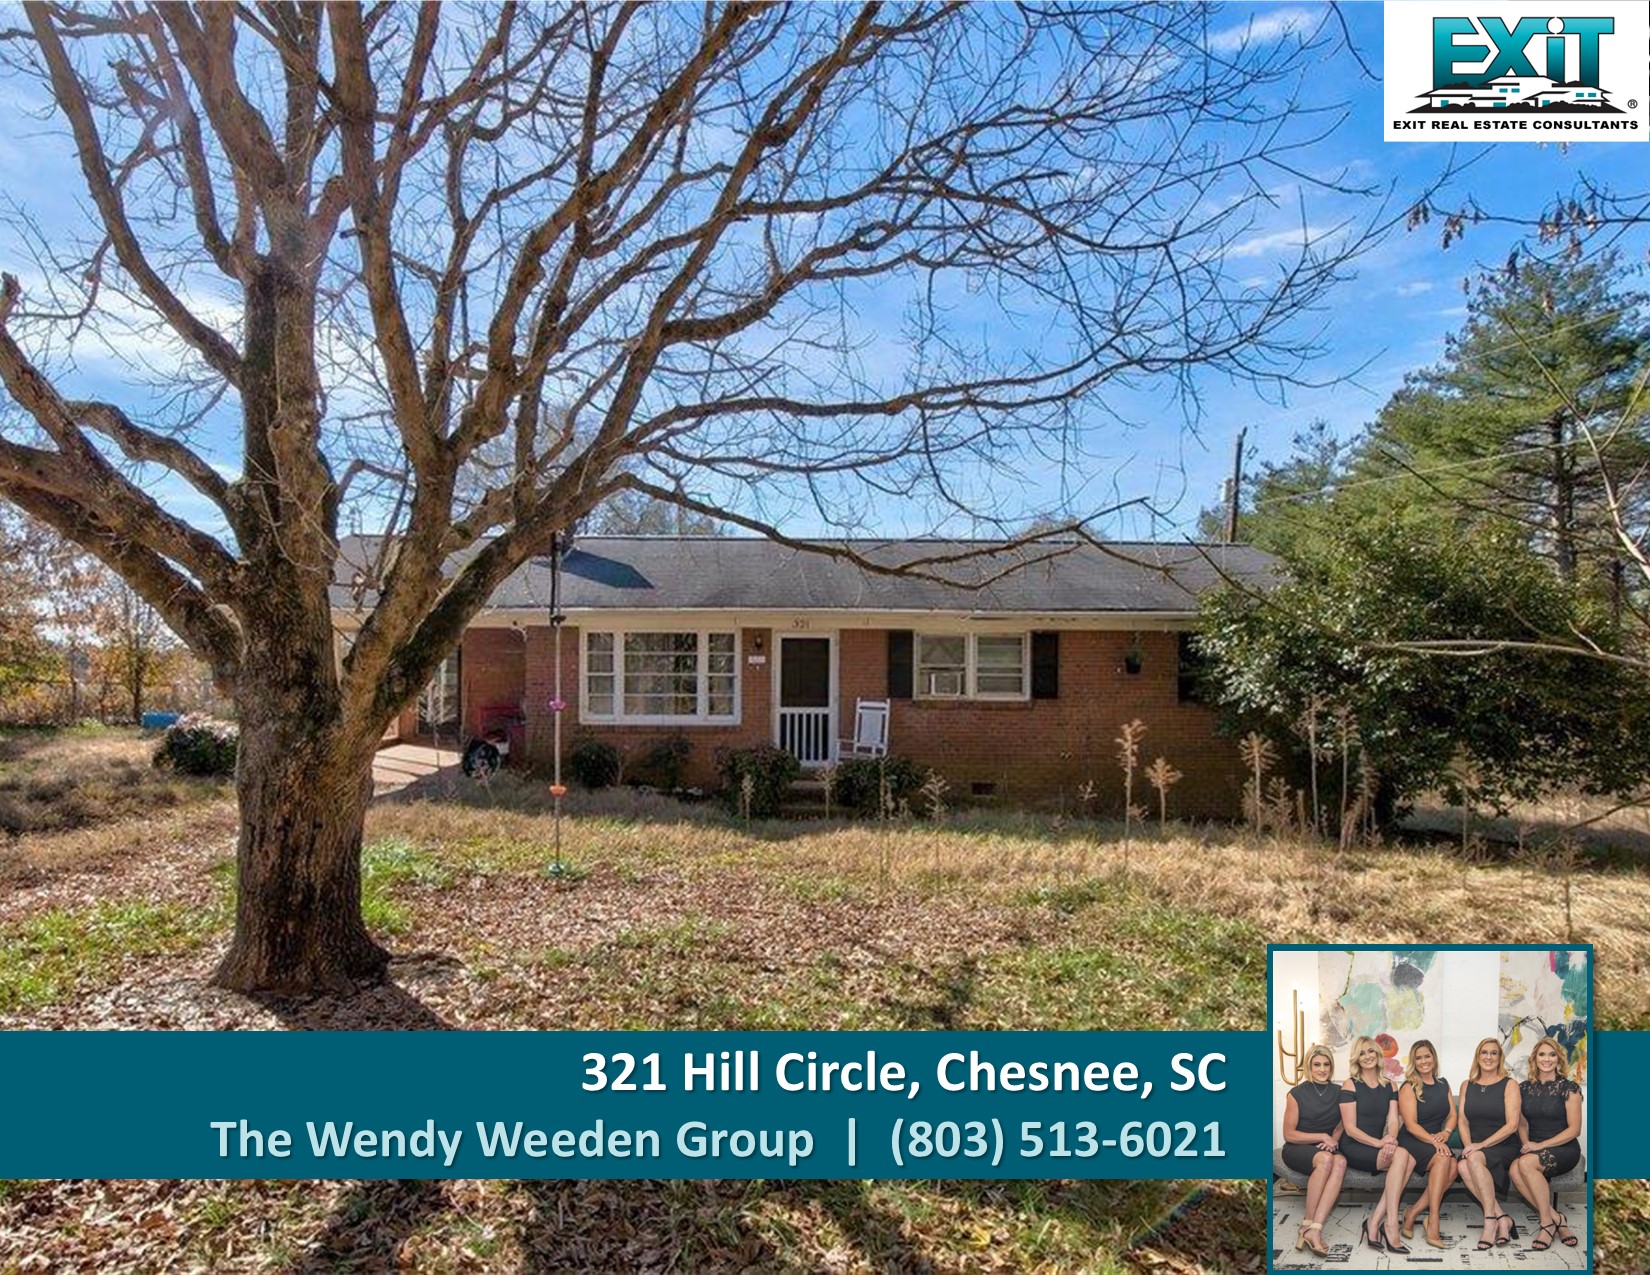 Just listed in Chesnee